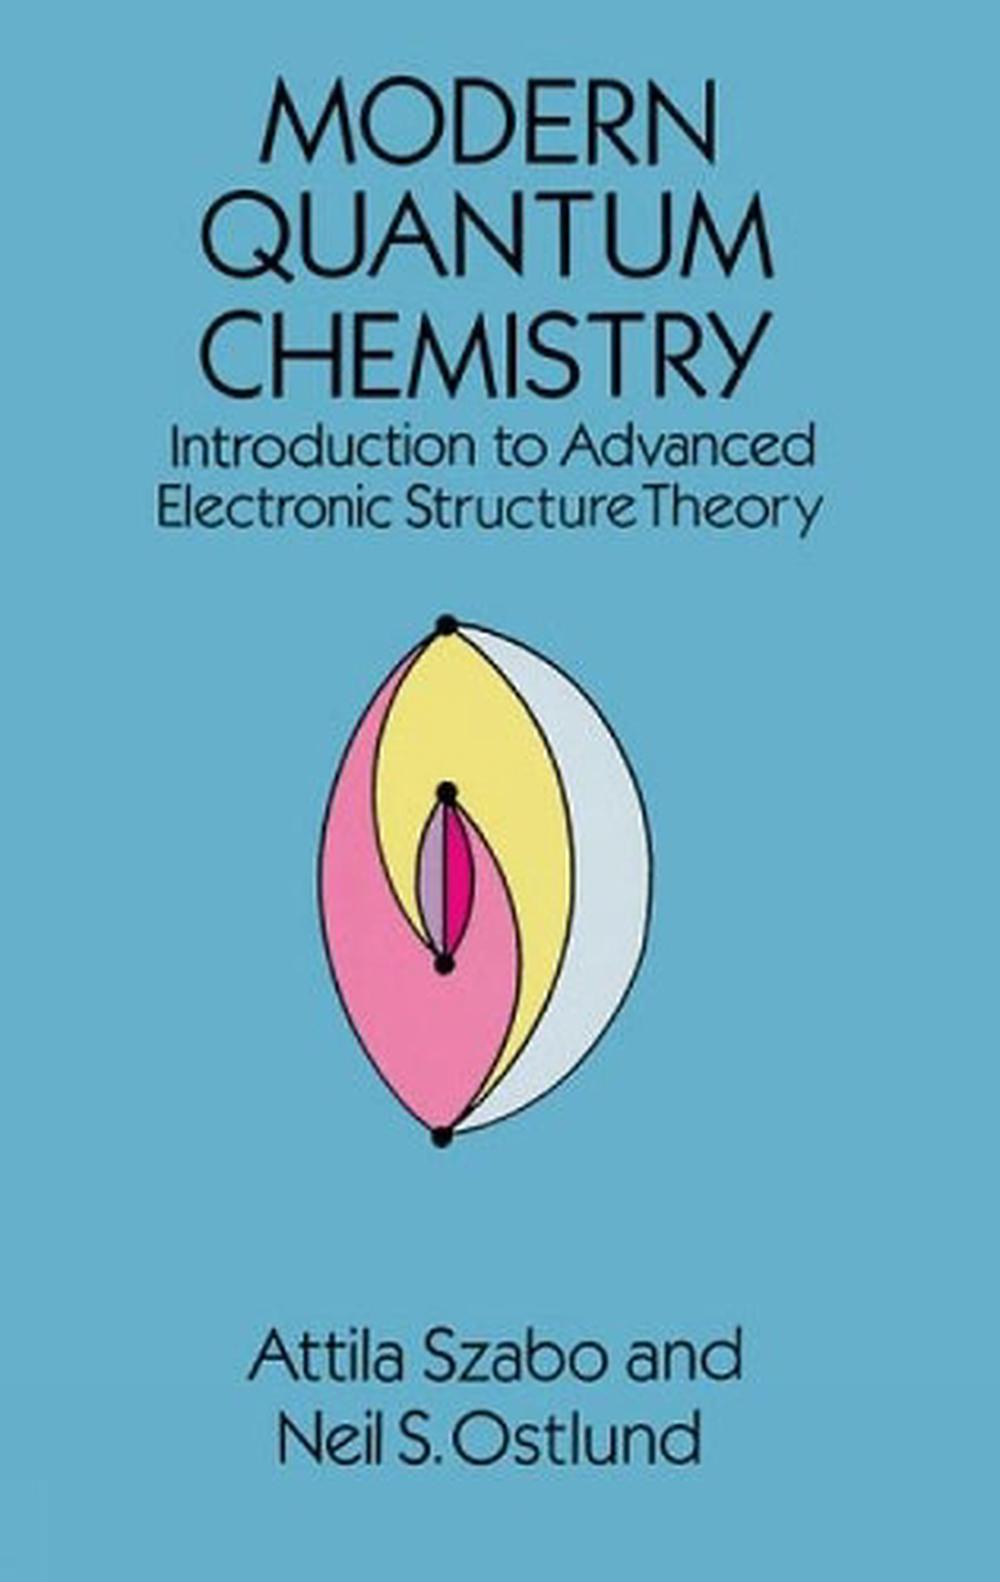 Modern Quantum Chemistry Introduction to Advanced Electronic Structure